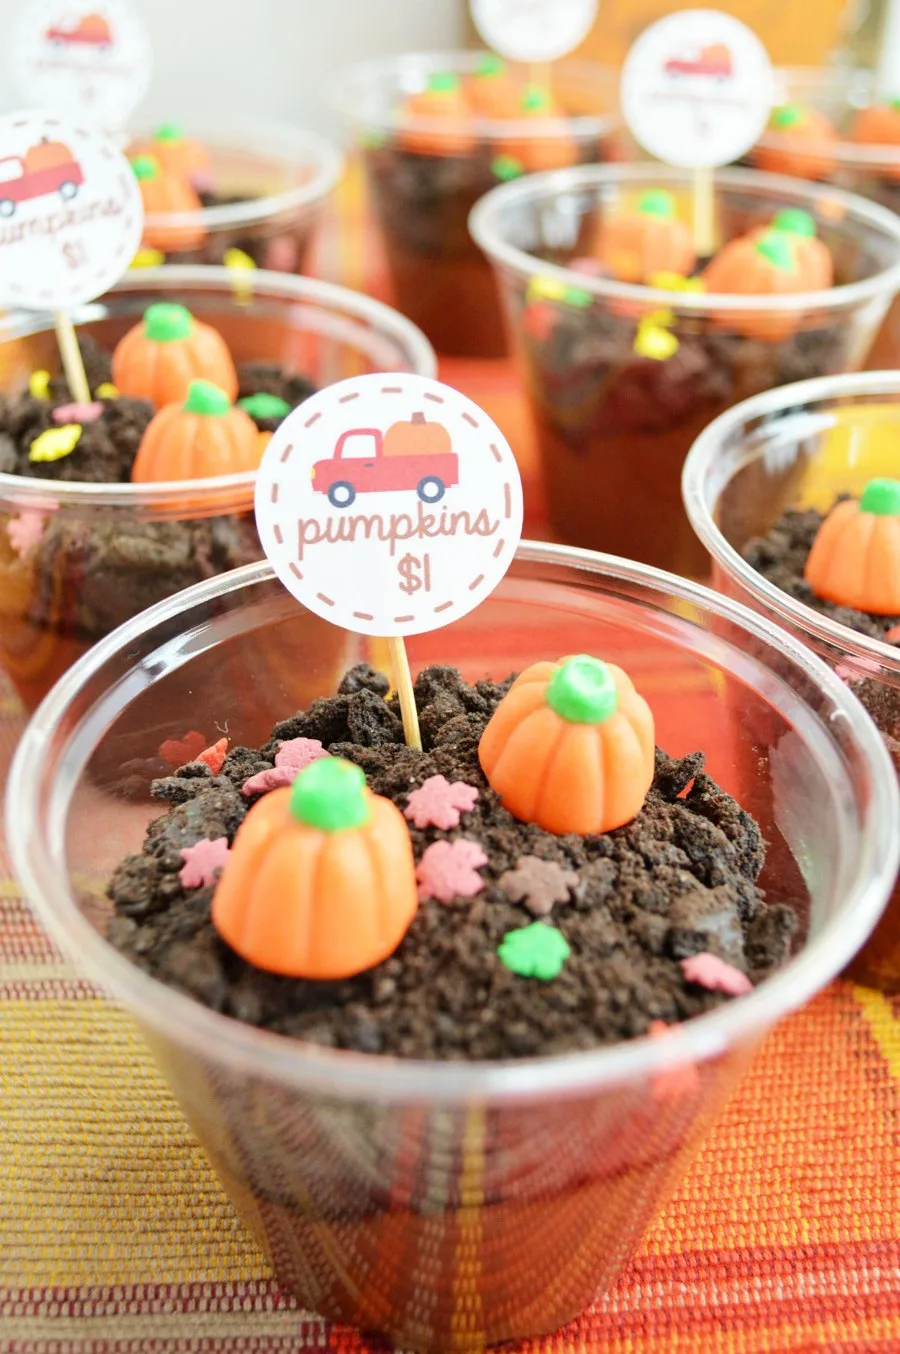 close up of plastic cups filled with dirt pudding and cute pumpkin decorations